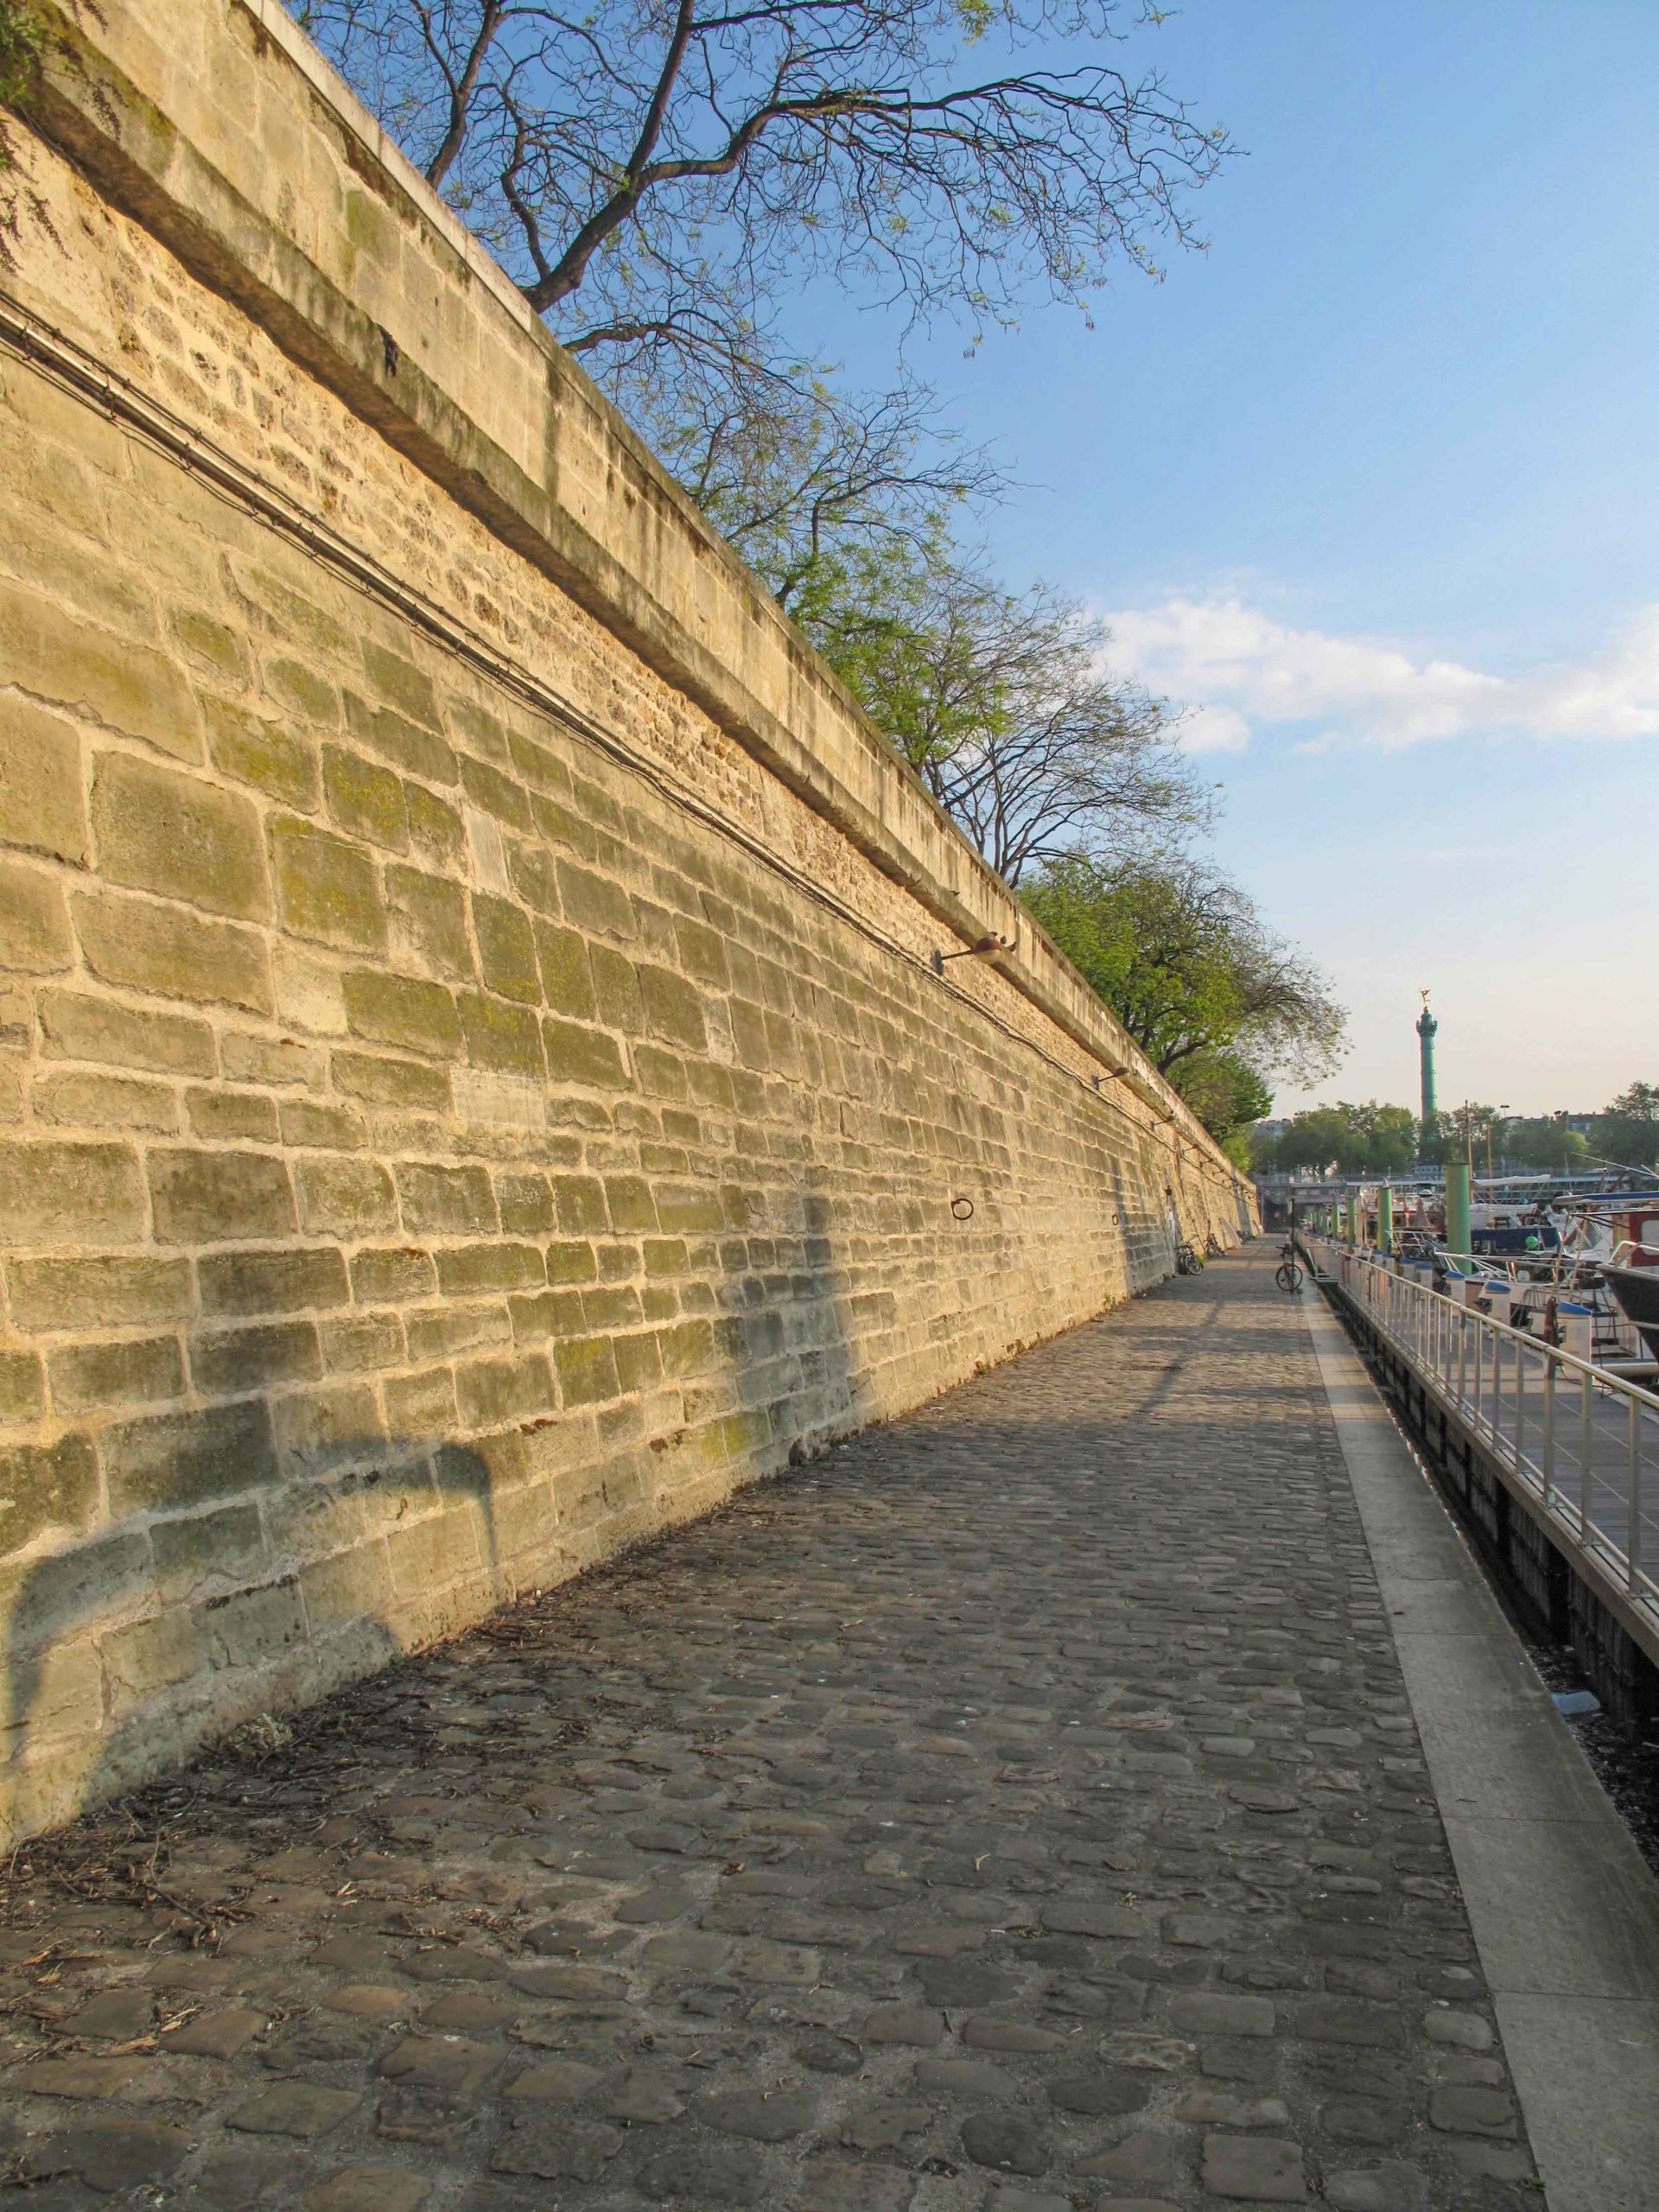 Ditch of the Bastille. Photo by Tangopaso [Public Domain from Wikimedia Commons]